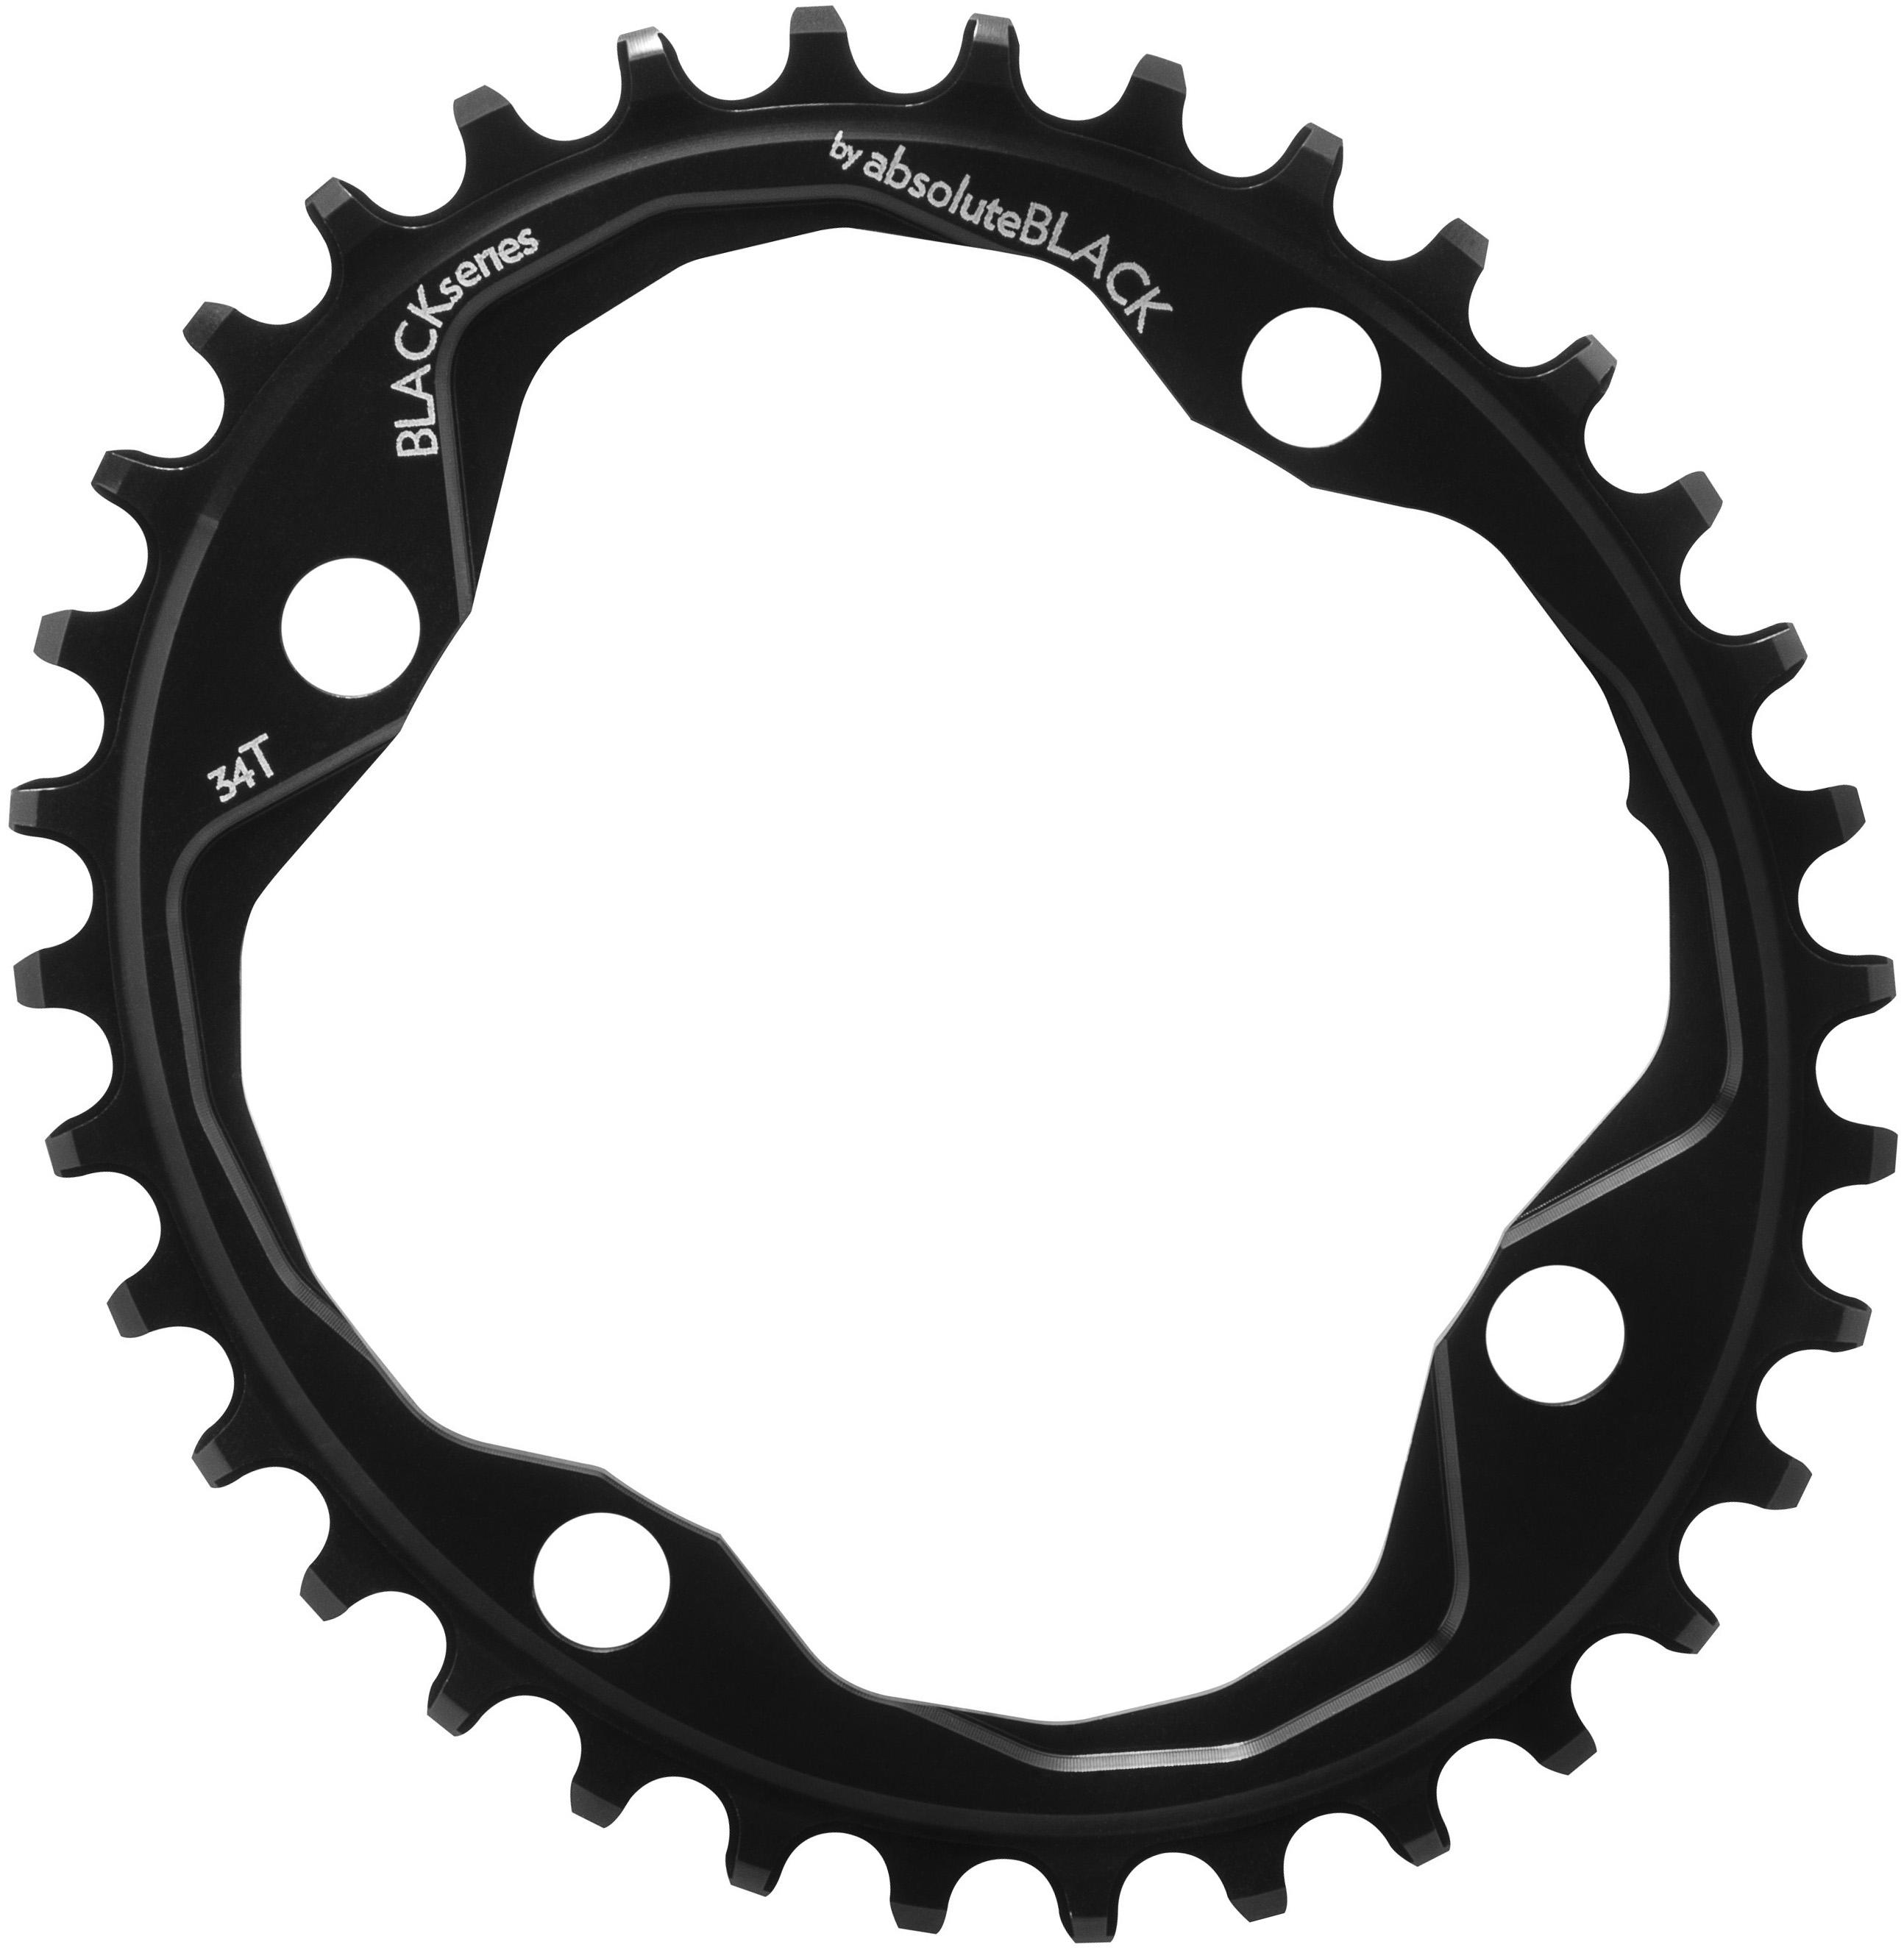 Black By Absolutebla Narrow Wide Oval Chainring